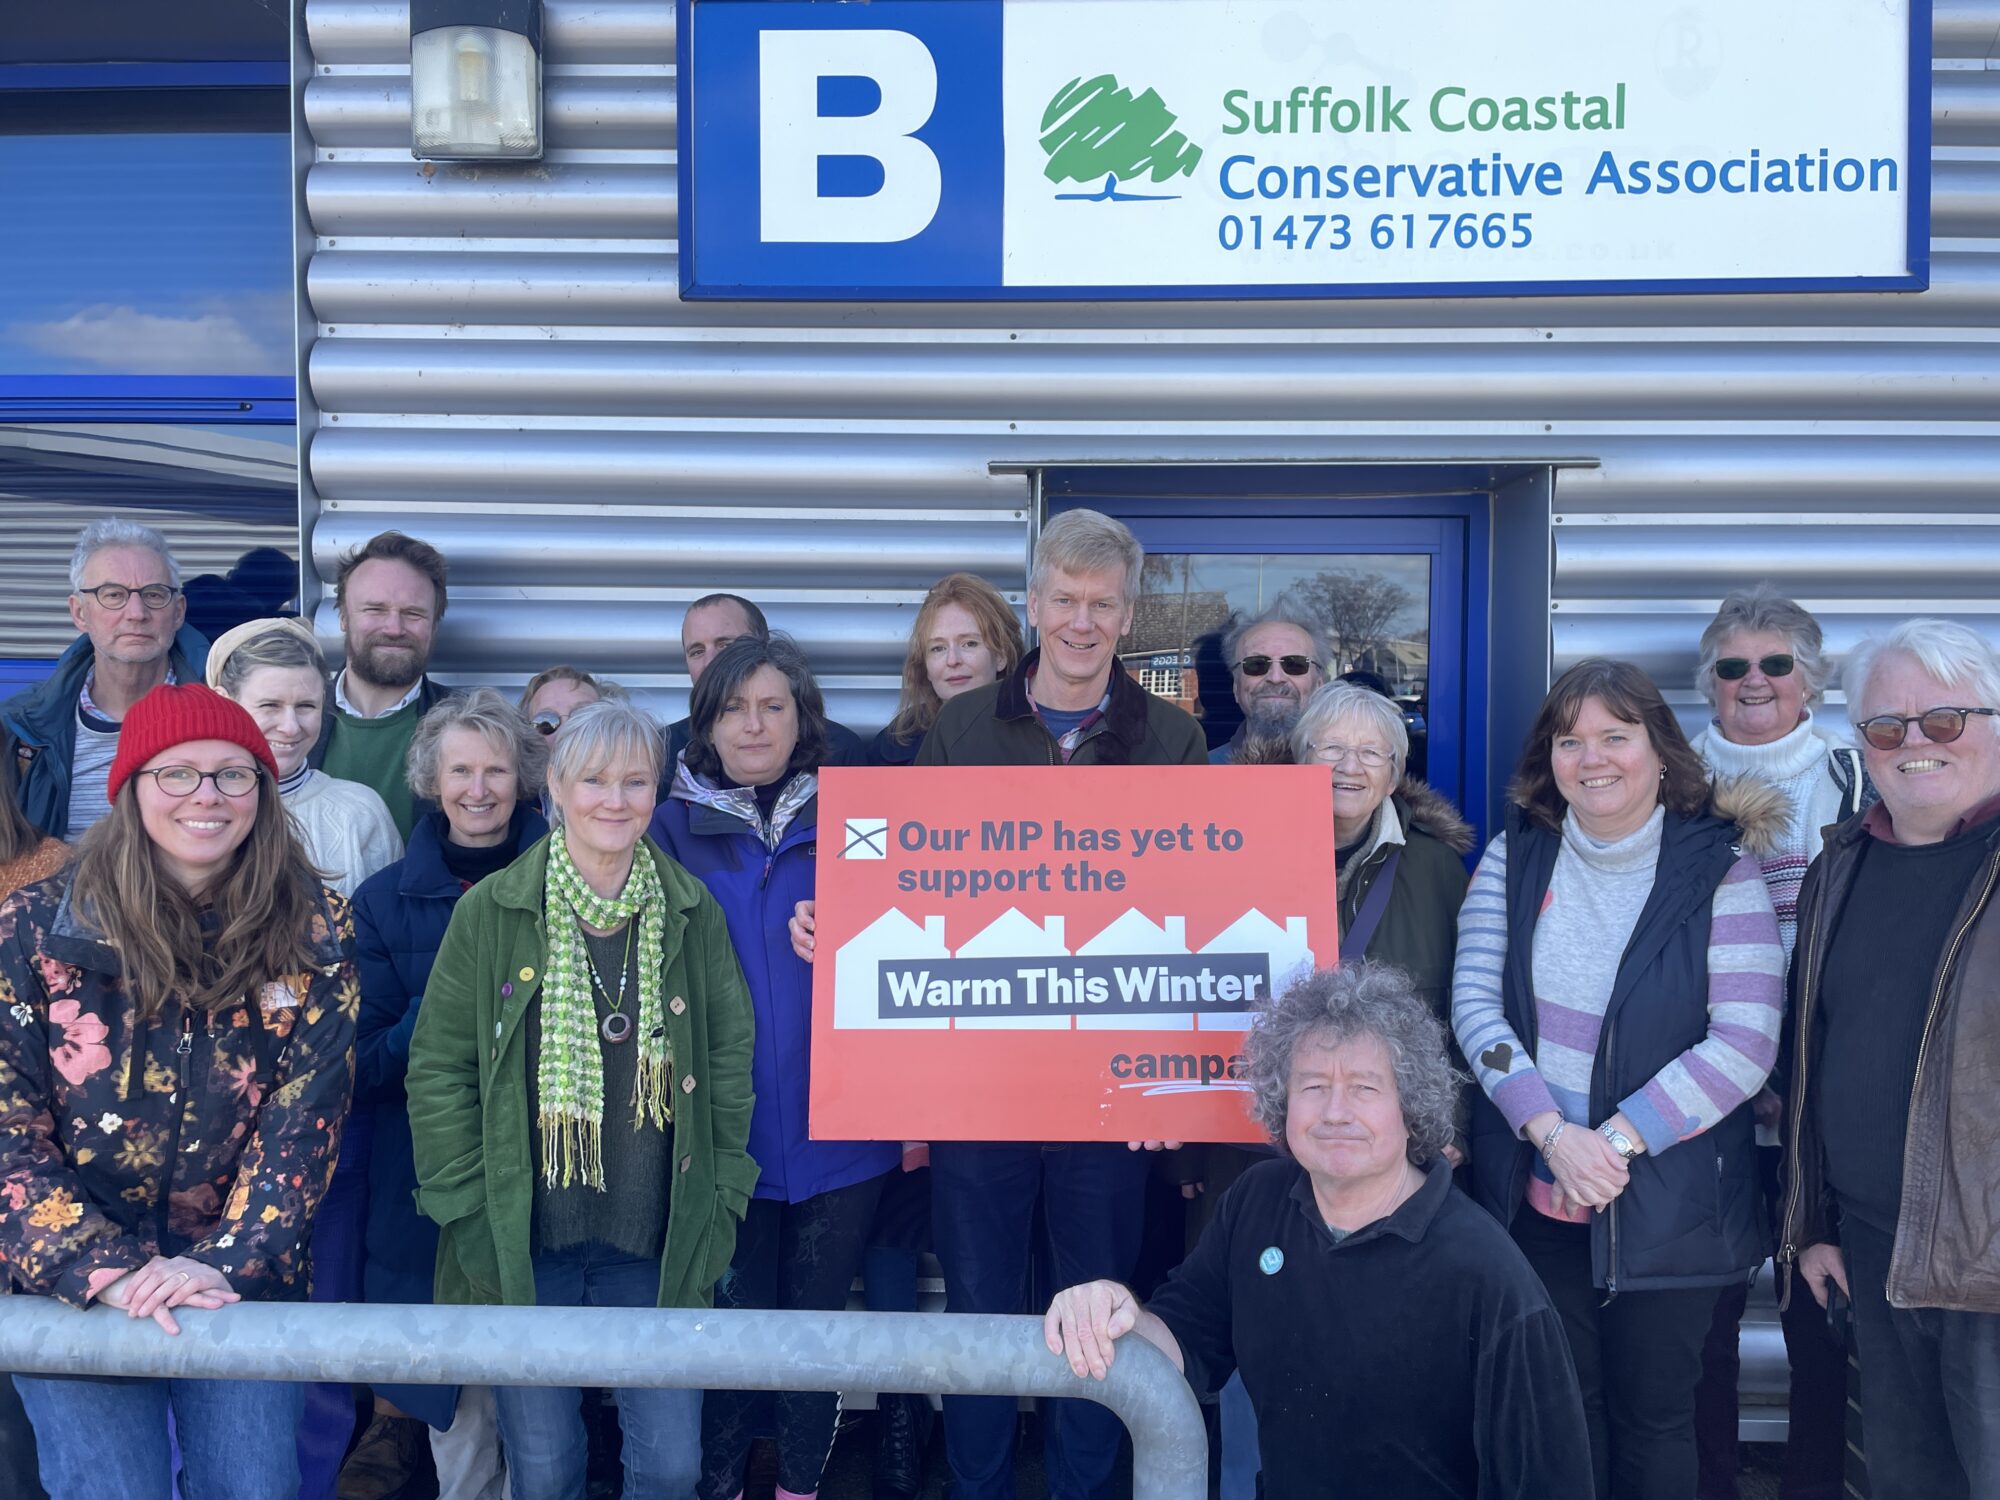 group of 17 people, mostly older and white, stand in front of. metal clad building with a sign reading "Suffolk Coastal Conservative Association 01473617665". In the middle one man holds a red right reading "Our MP has yet to support the Warm This Winter campaign"